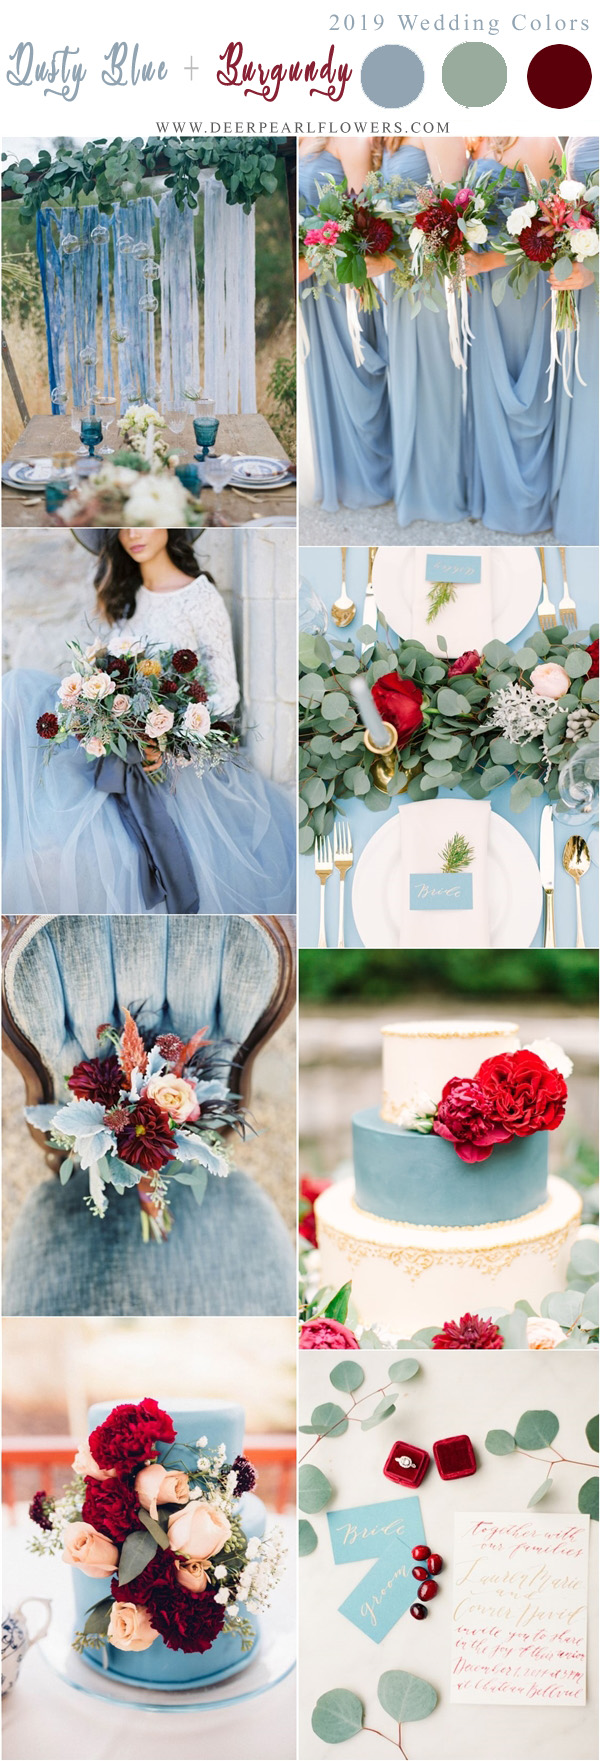 dusty blue and burgundy deep red wedding color ideas